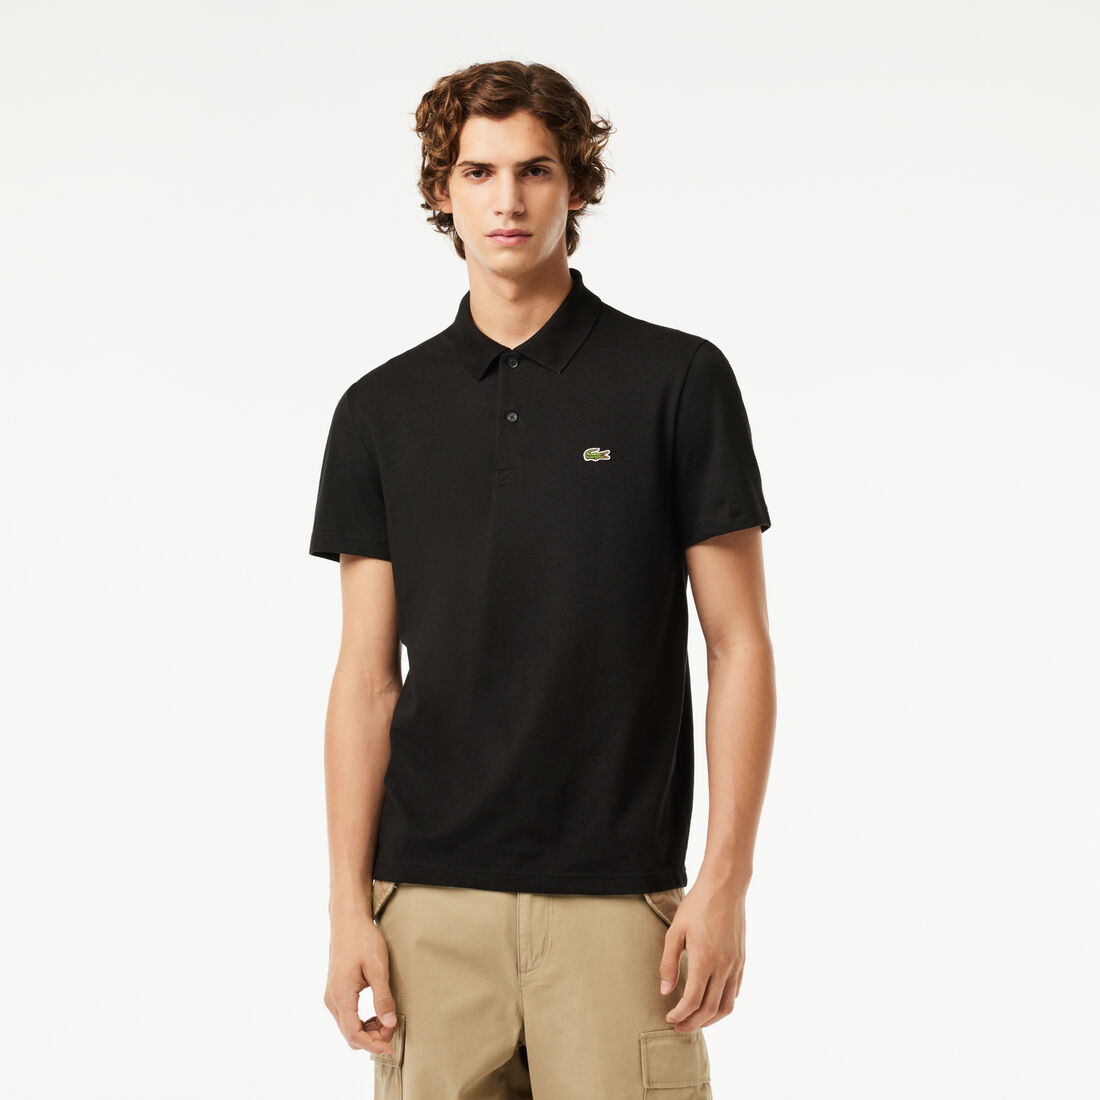 Regular Fit Polyester Cotton Polo Shirt - DH0783-00-031